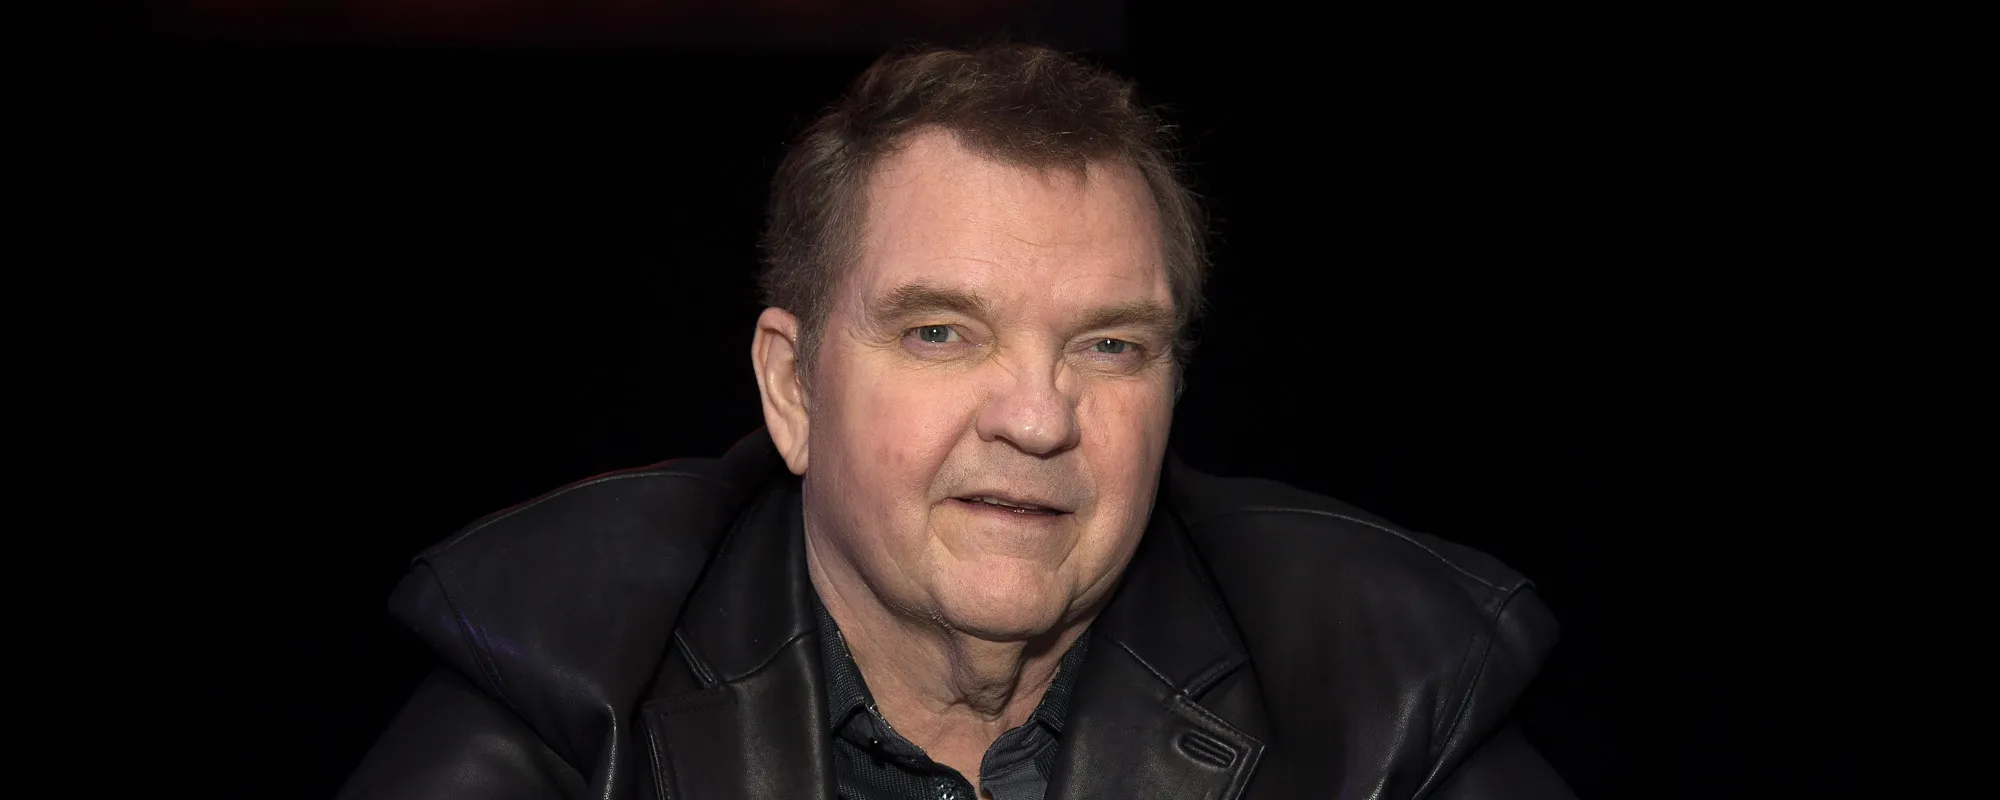 Singer and Actor Meat Loaf Dies at 74